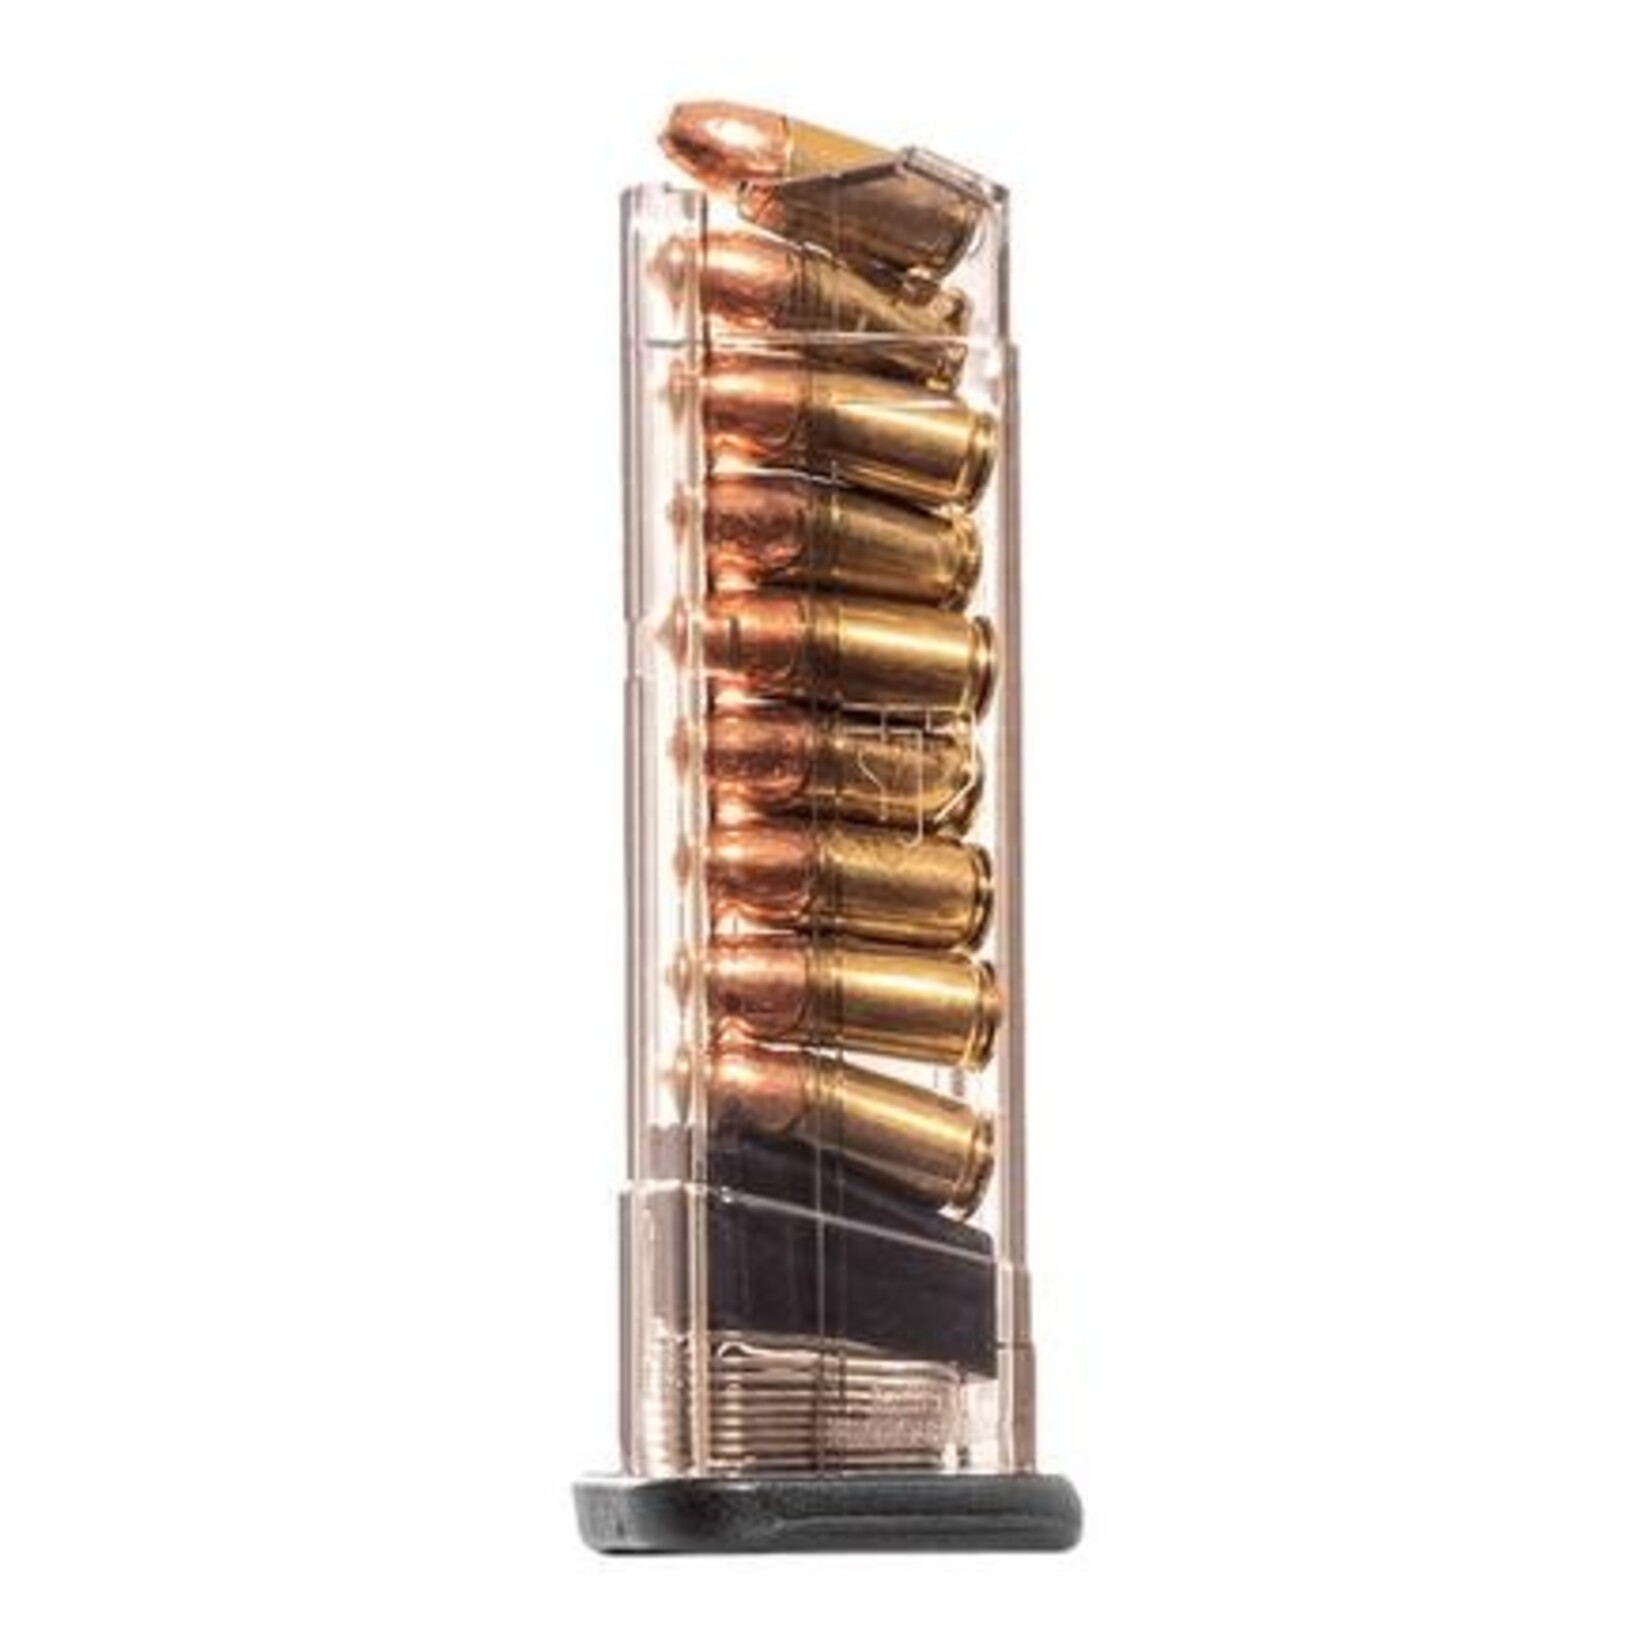 ETS GROUP ETS S&W SHIELD MAGAZINE - 9MM - EXT 9-ROUND